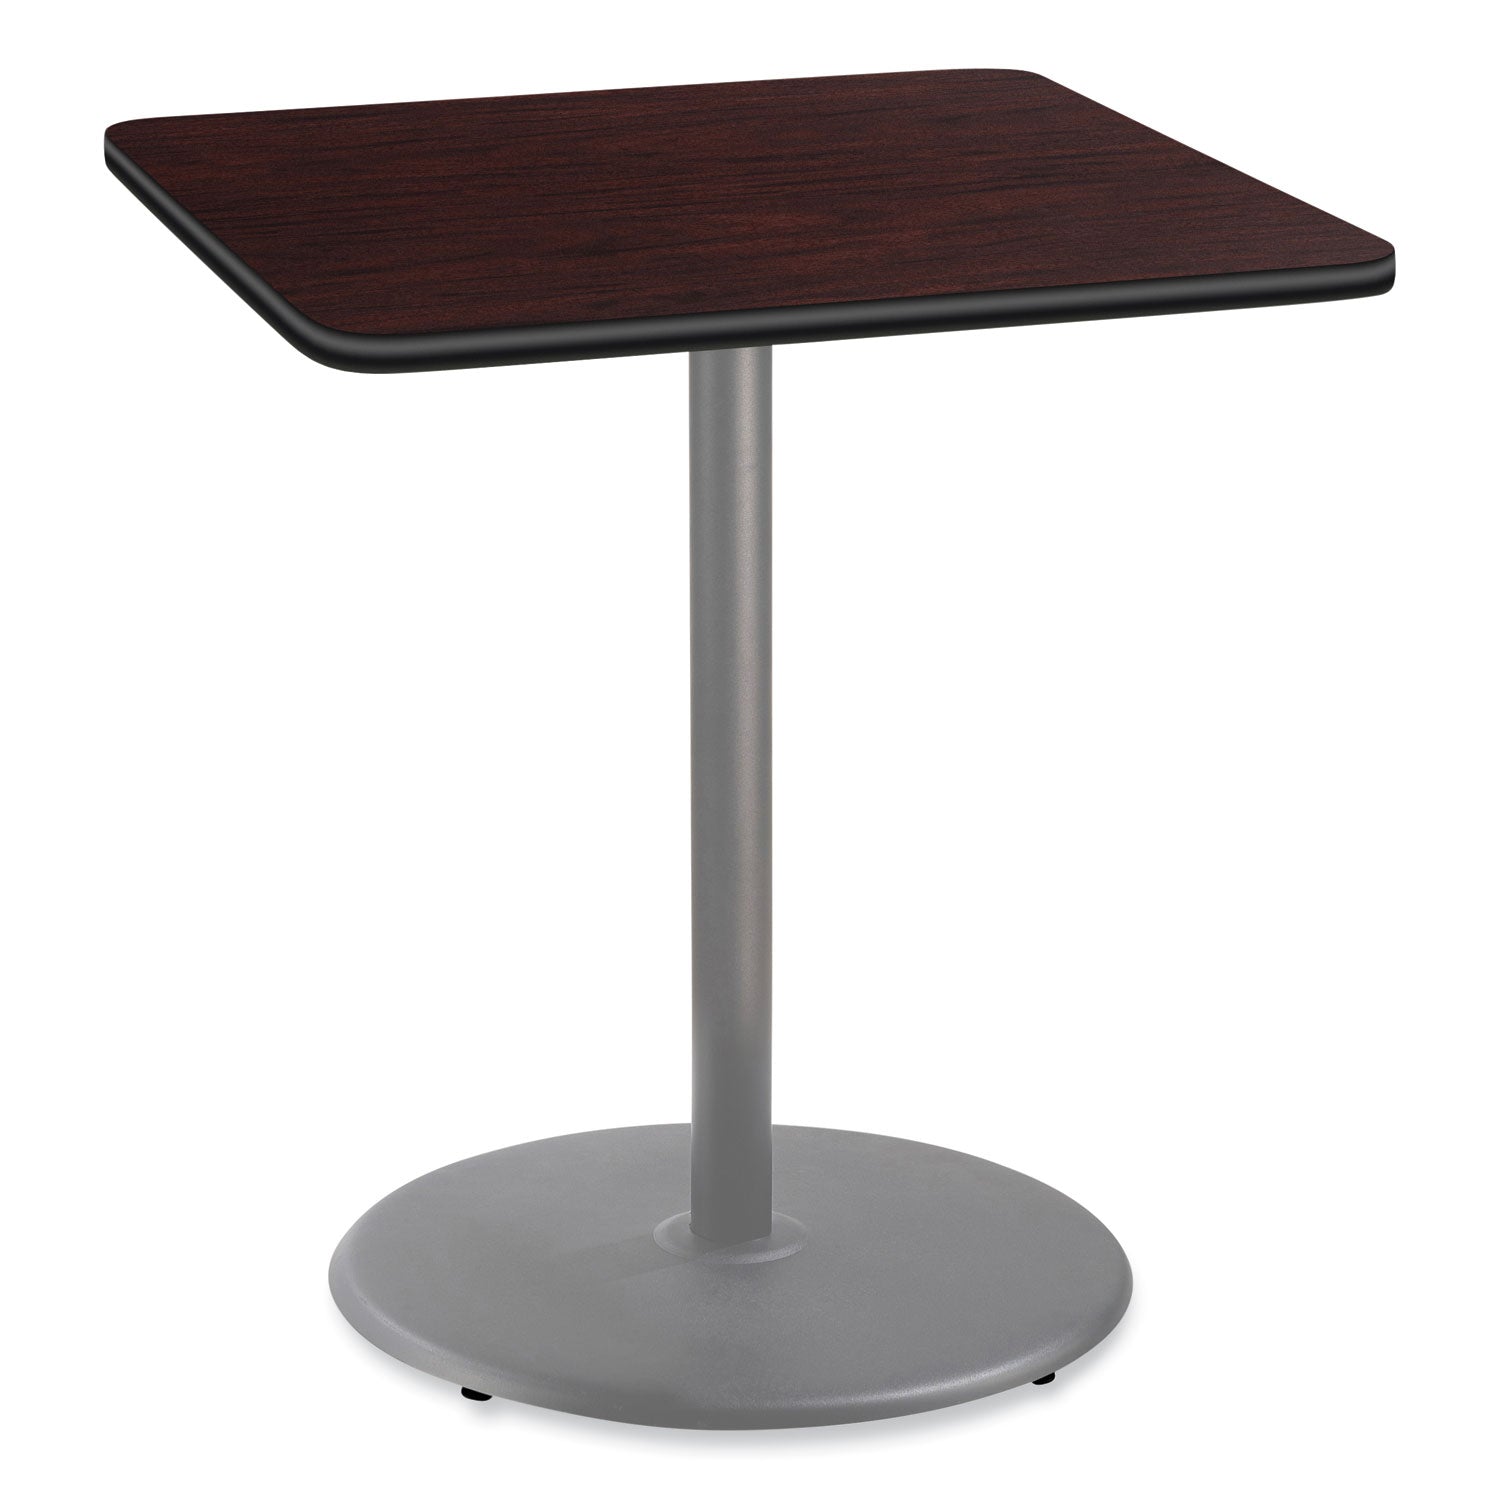 cafe-table-36w-x-36d-x-42h-square-top-round-base-gray-nebula-top-black-base-ships-in-7-10-business-days_npsct33636rb1gy - 2